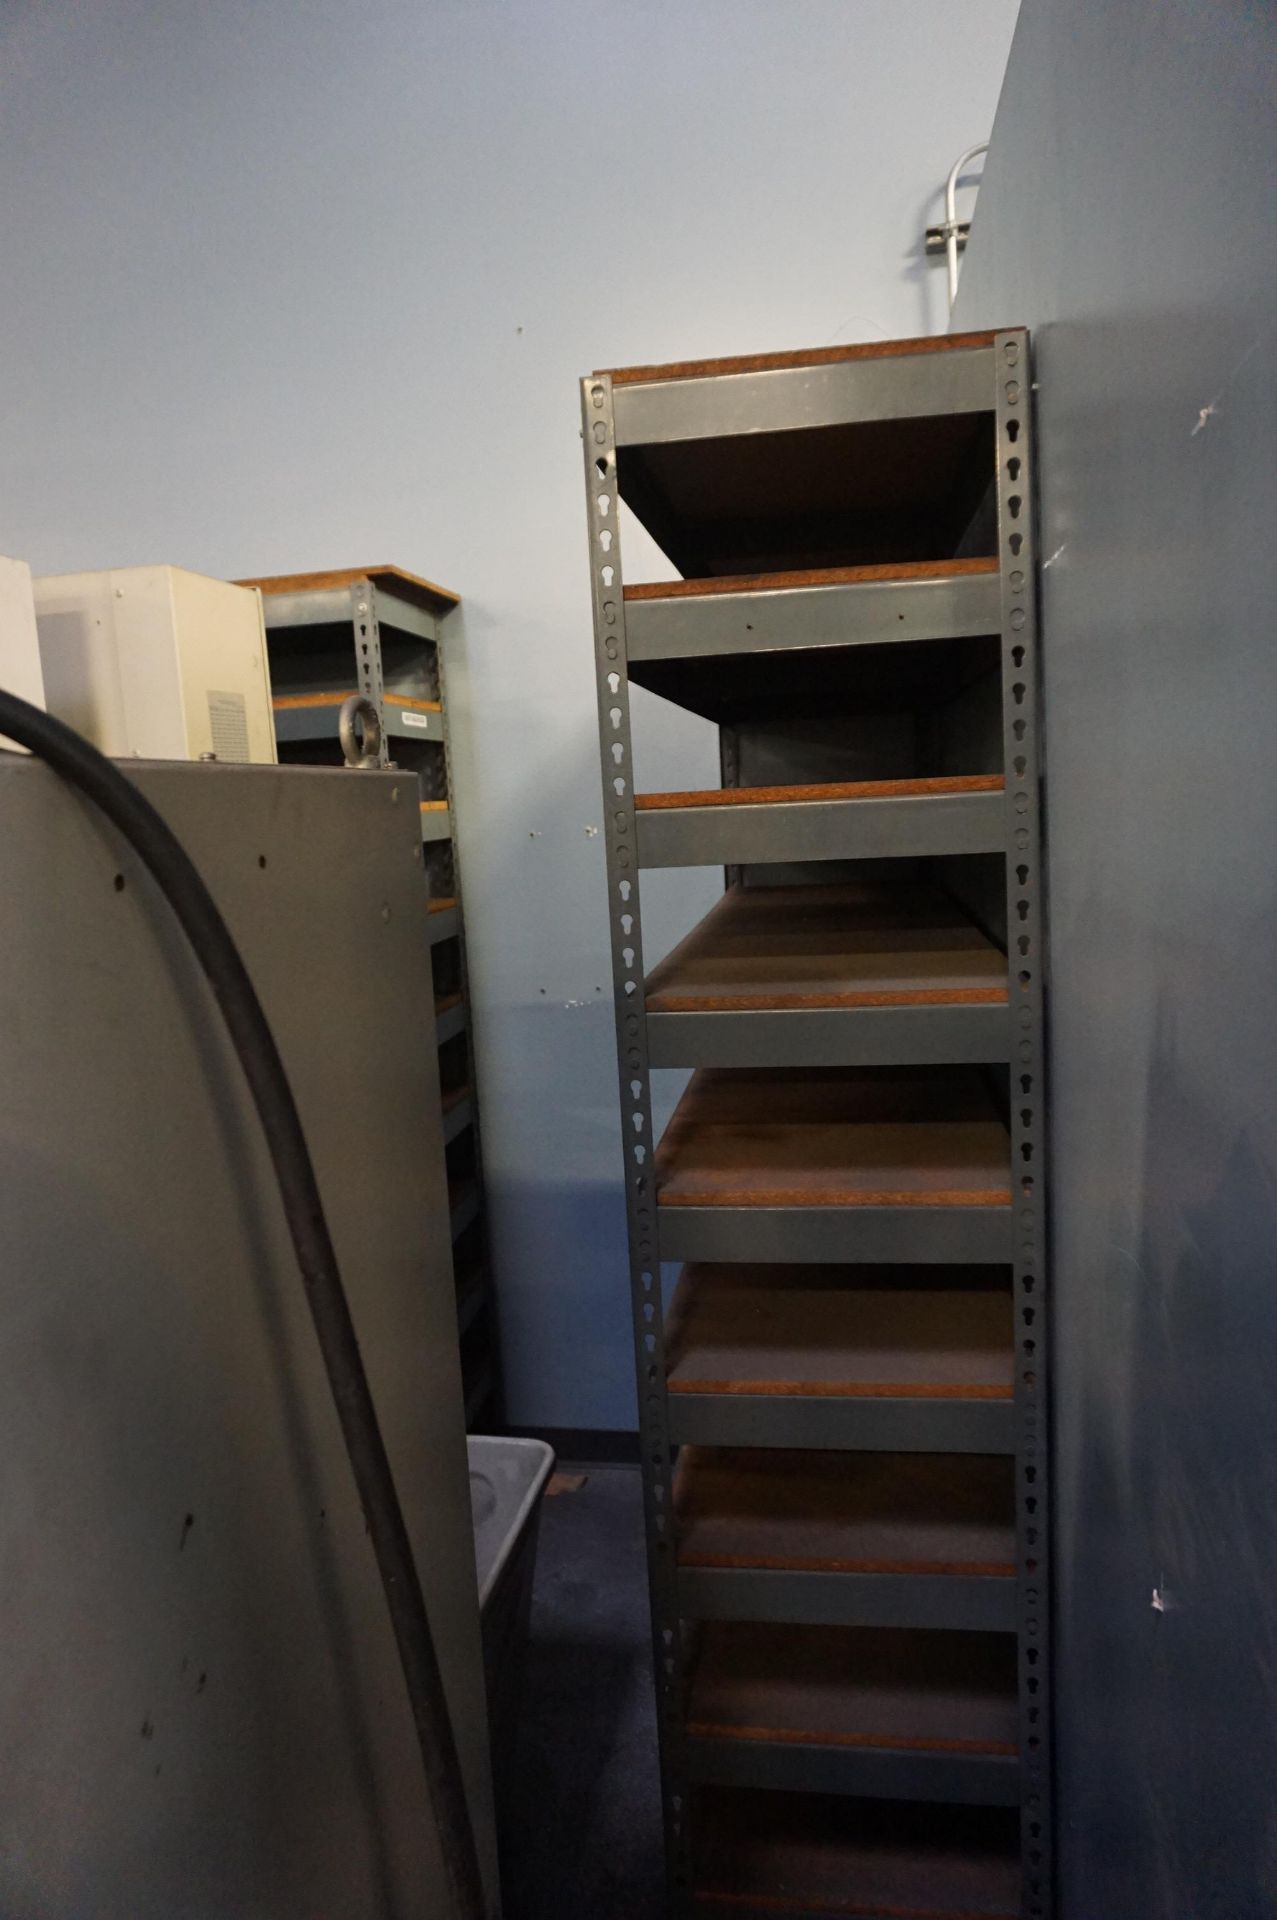 MISC. STEEL MODULAR SHELVING AND STORANGE RACKS WITH CONTENTS TO INCLUDE: MISC. MOTORS, ULINE BOXES, - Image 2 of 12